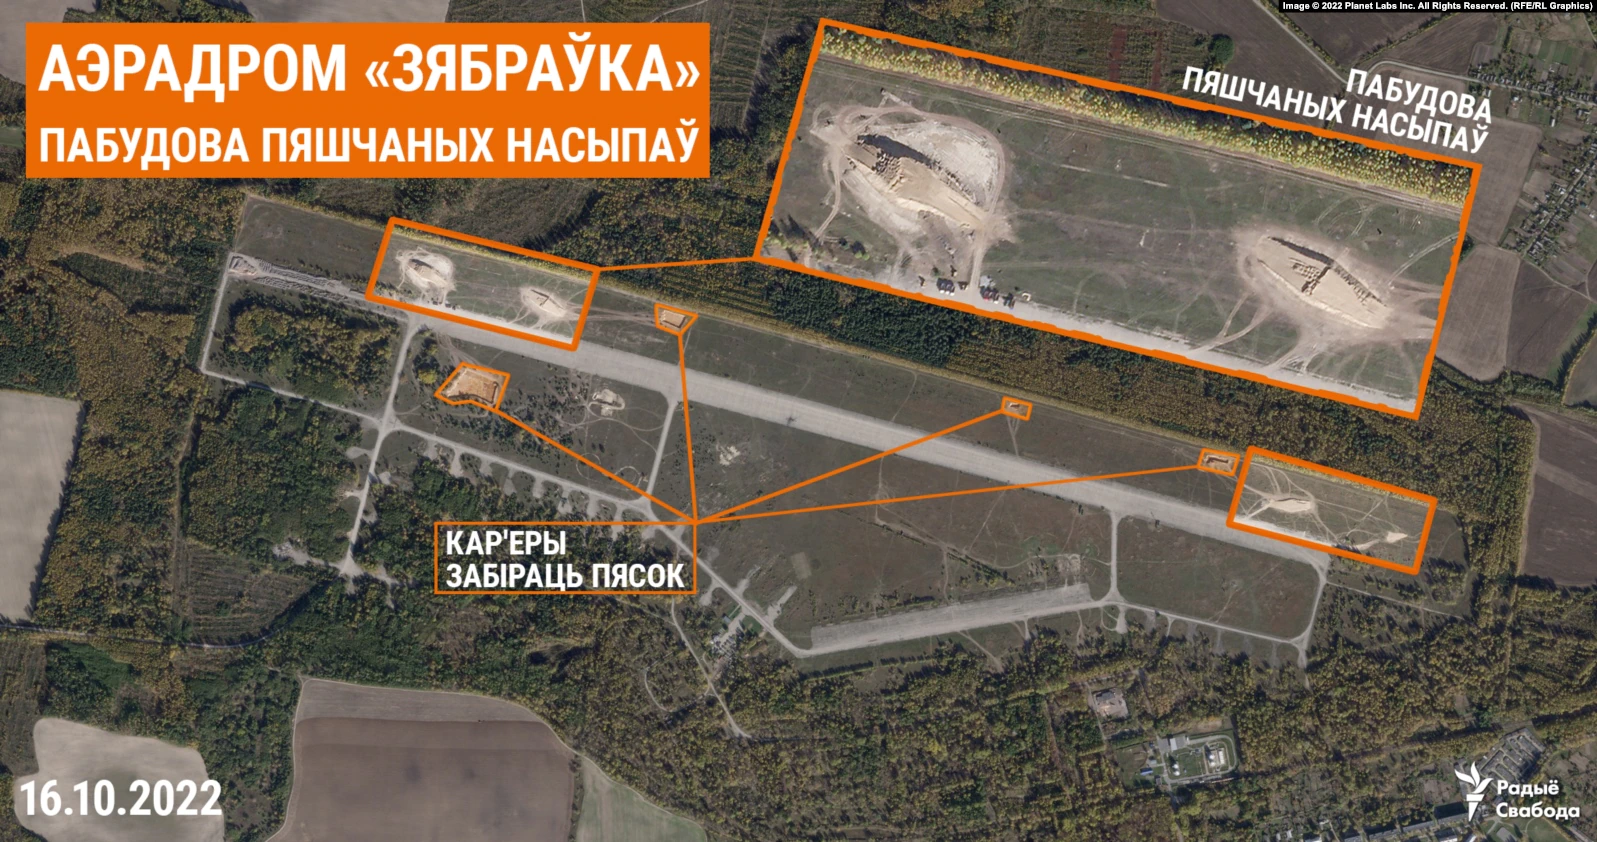 The russians are Completing Preparation of Zyabrovka airfield 22 km From Border with Ukraine in Belarus to Strike Ukraine, Defense Express